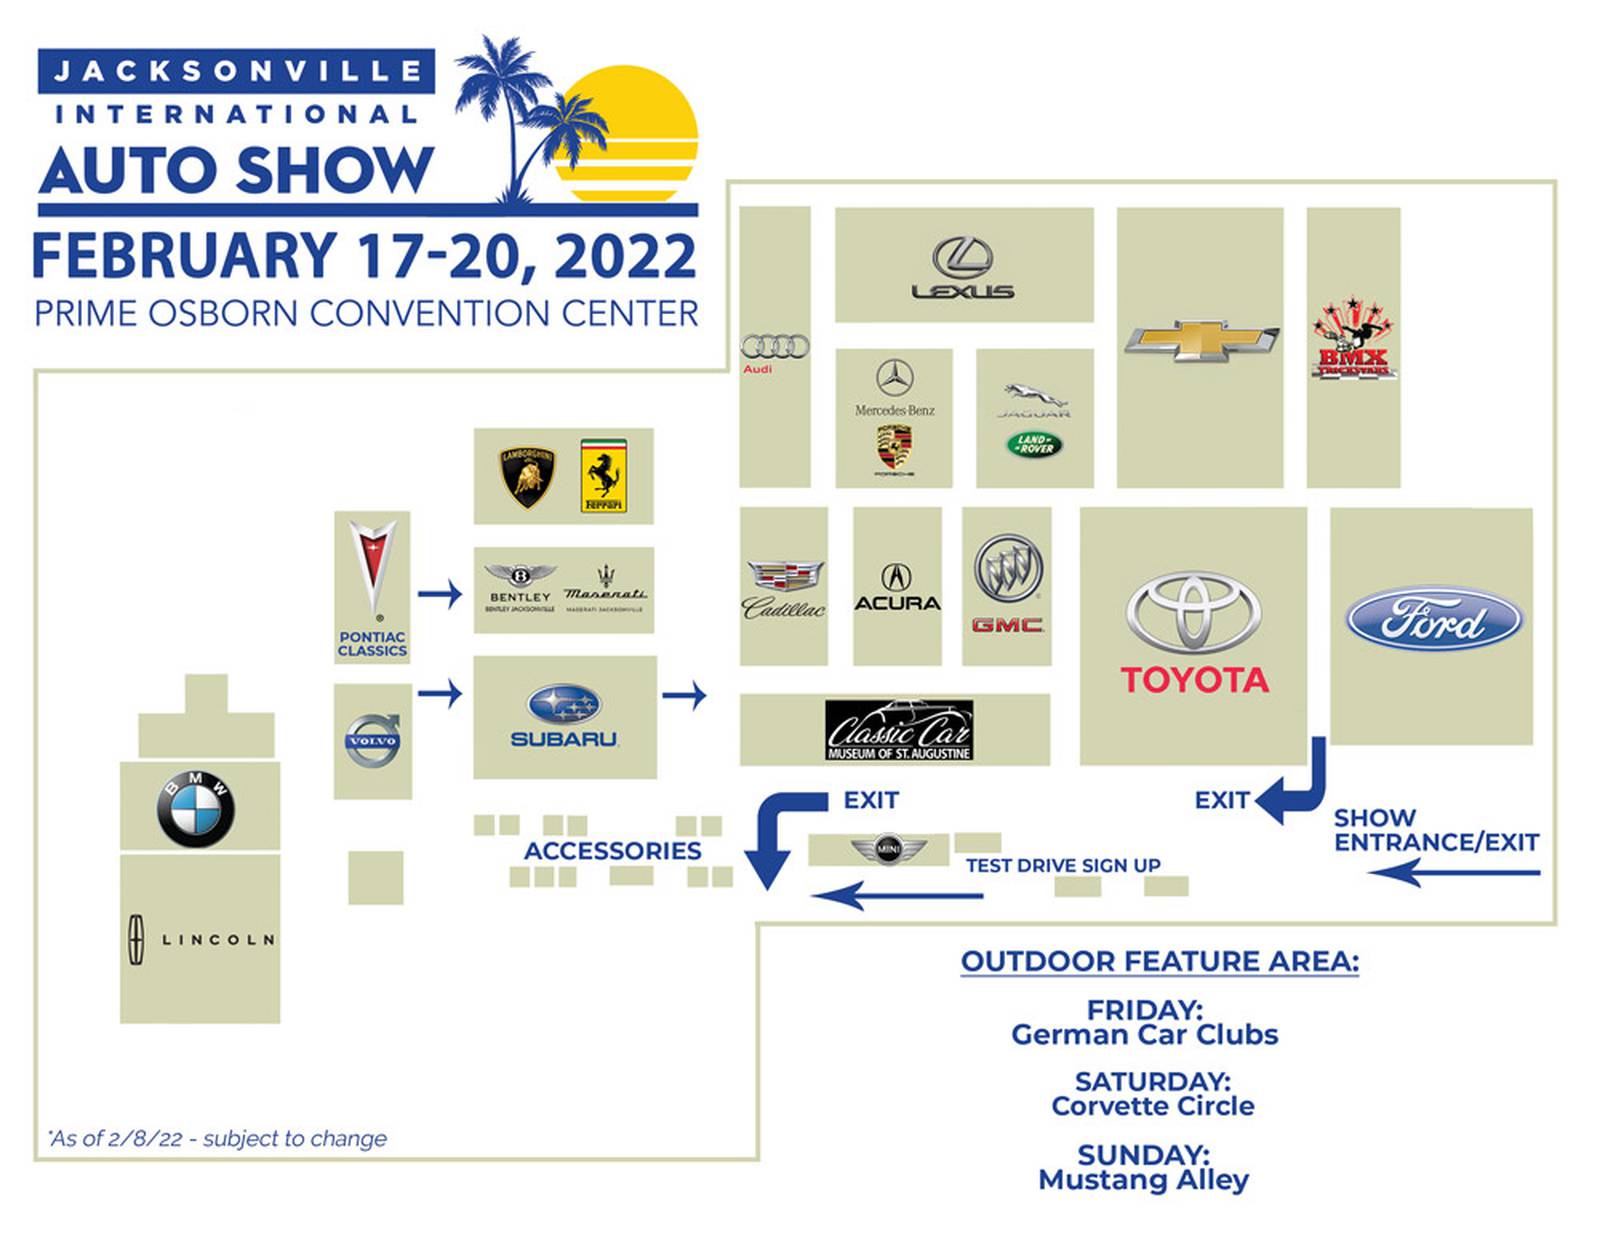 Jacksonville International Auto Show returns to the River City. Here’s